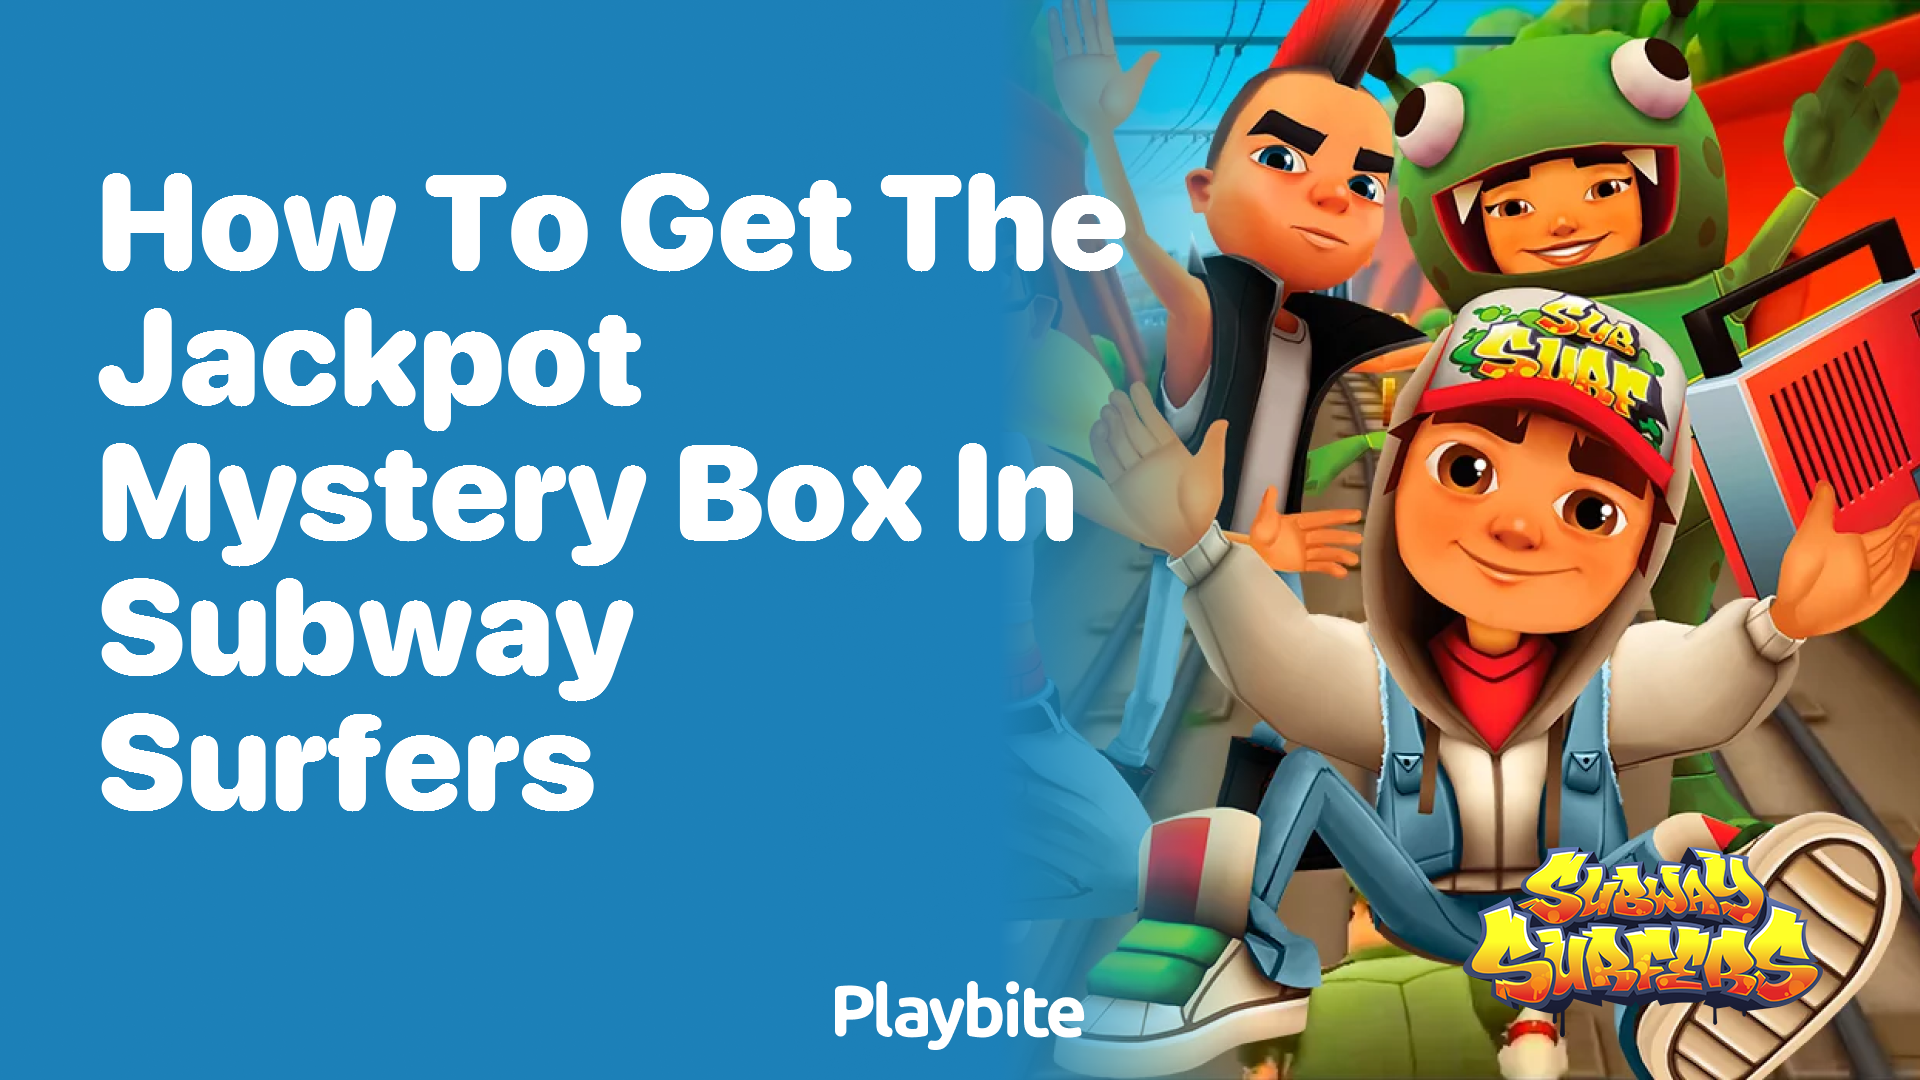 How to Get the Jackpot Mystery Box in Subway Surfers